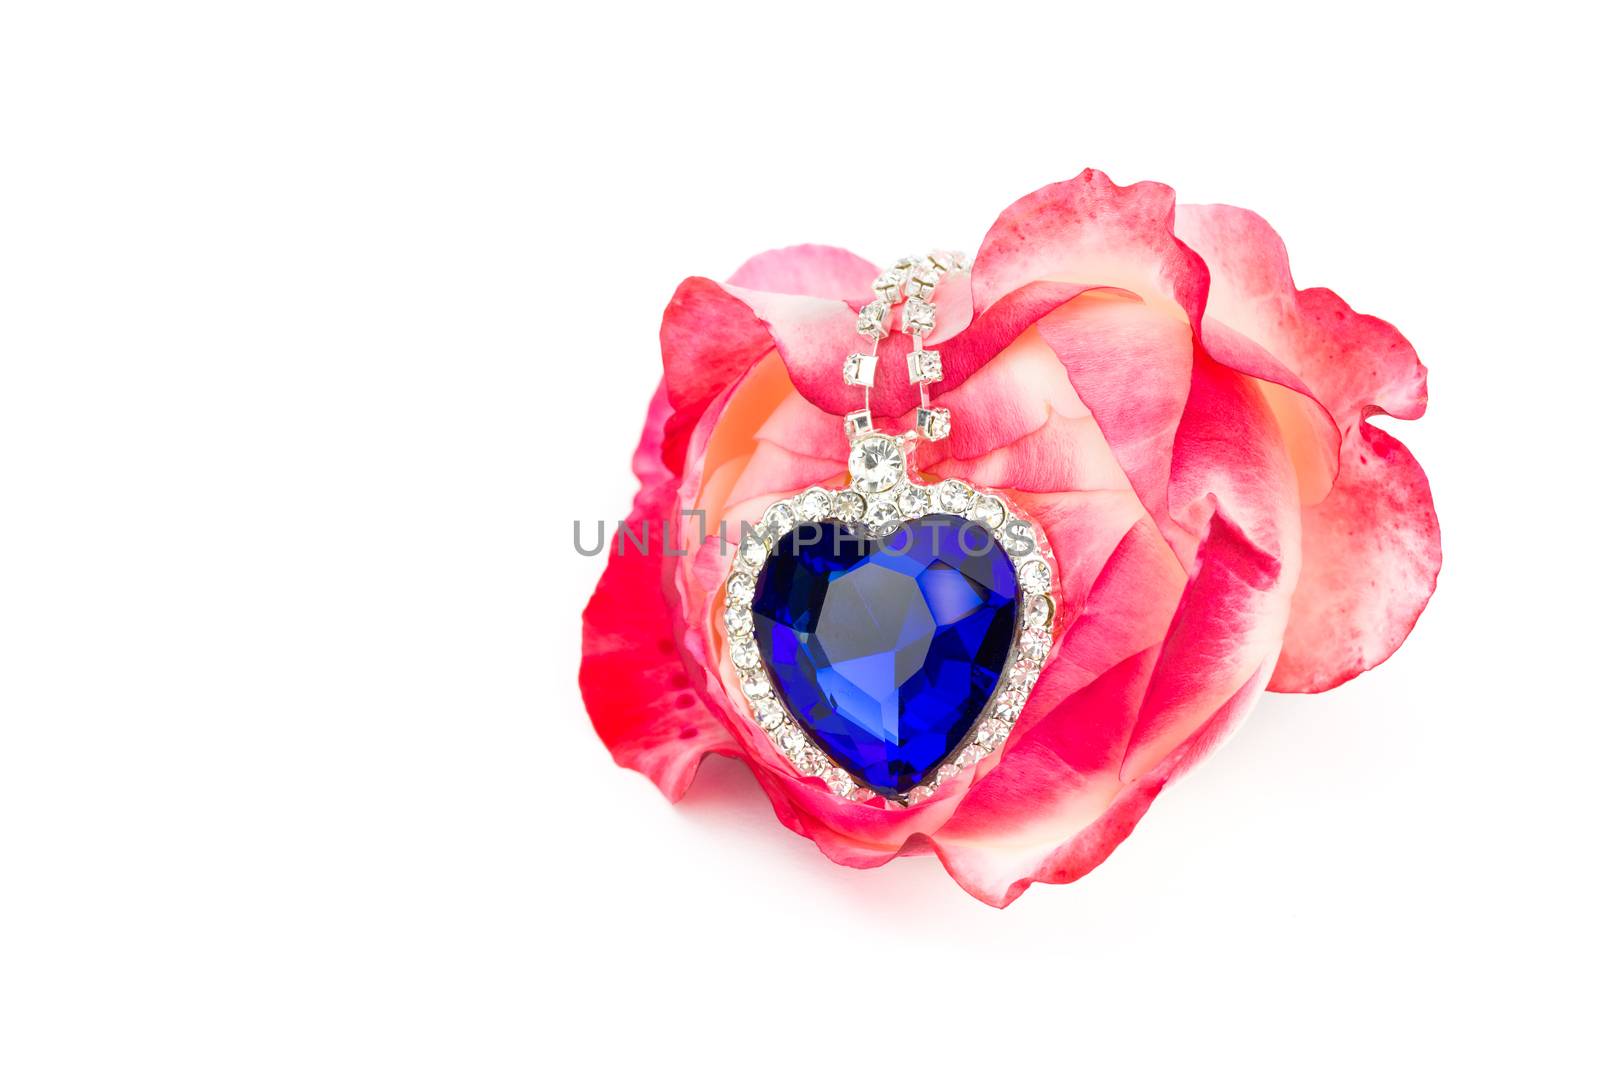 Blue jewelry heart hanging in red rose by BenSchonewille